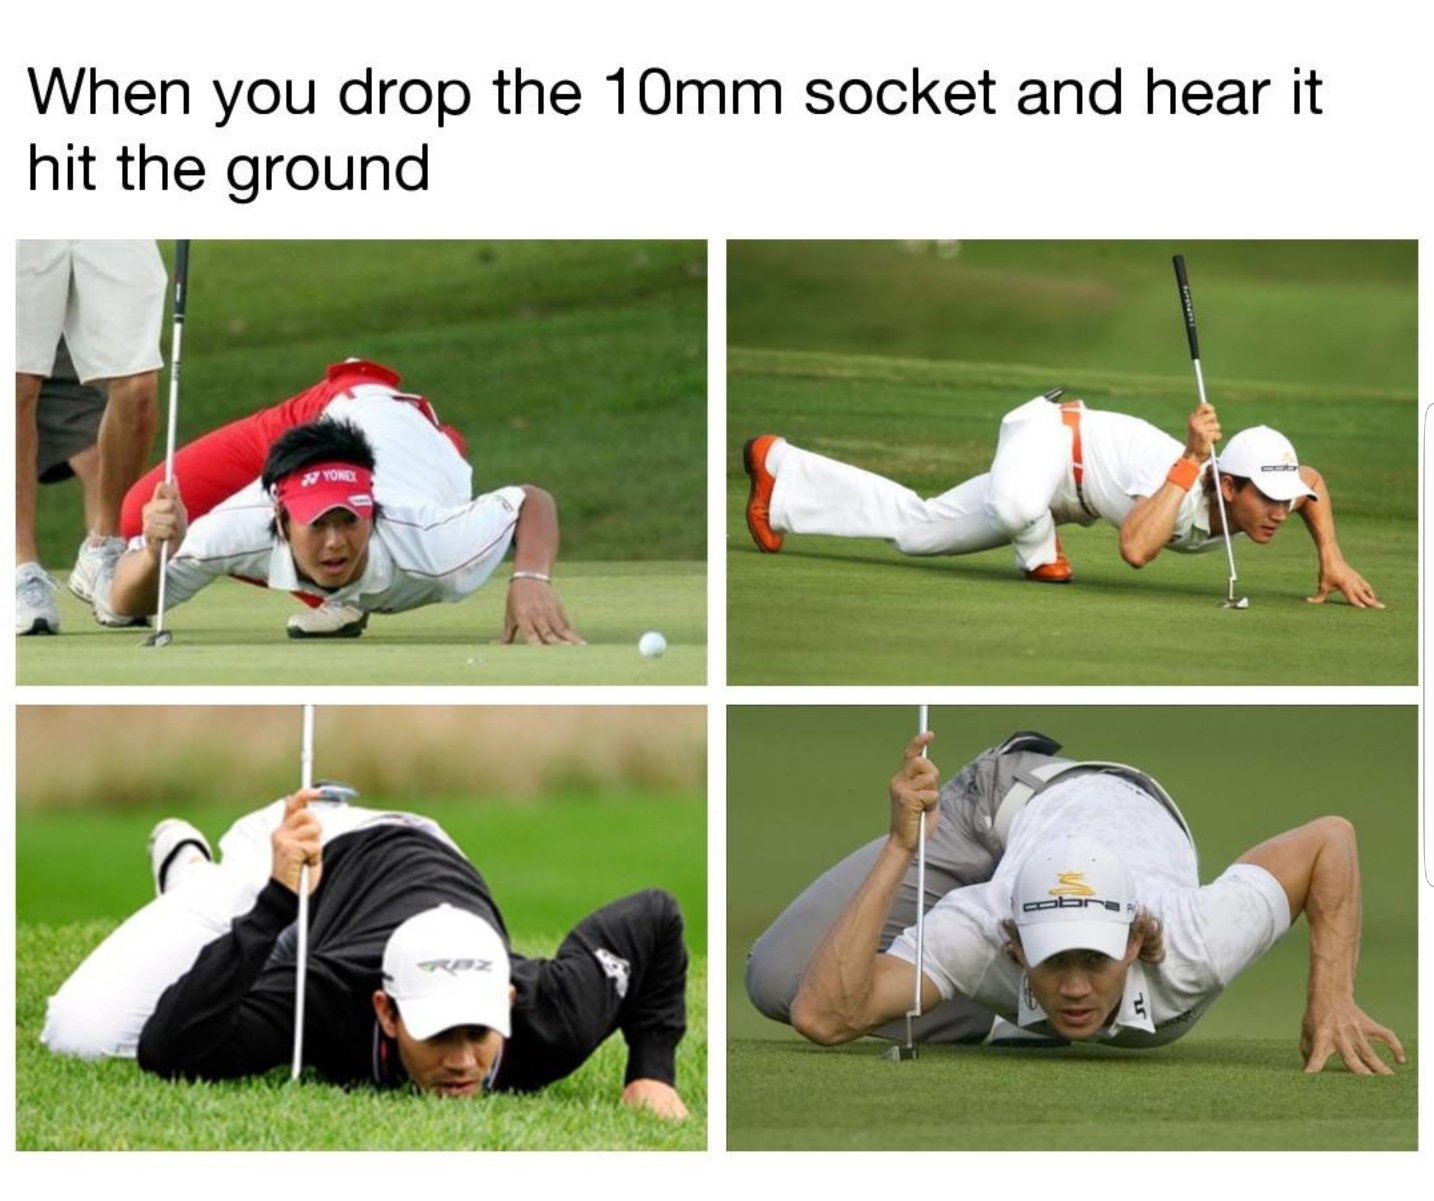 crack memes - When you drop the 10mm socket and hear it hit the ground.